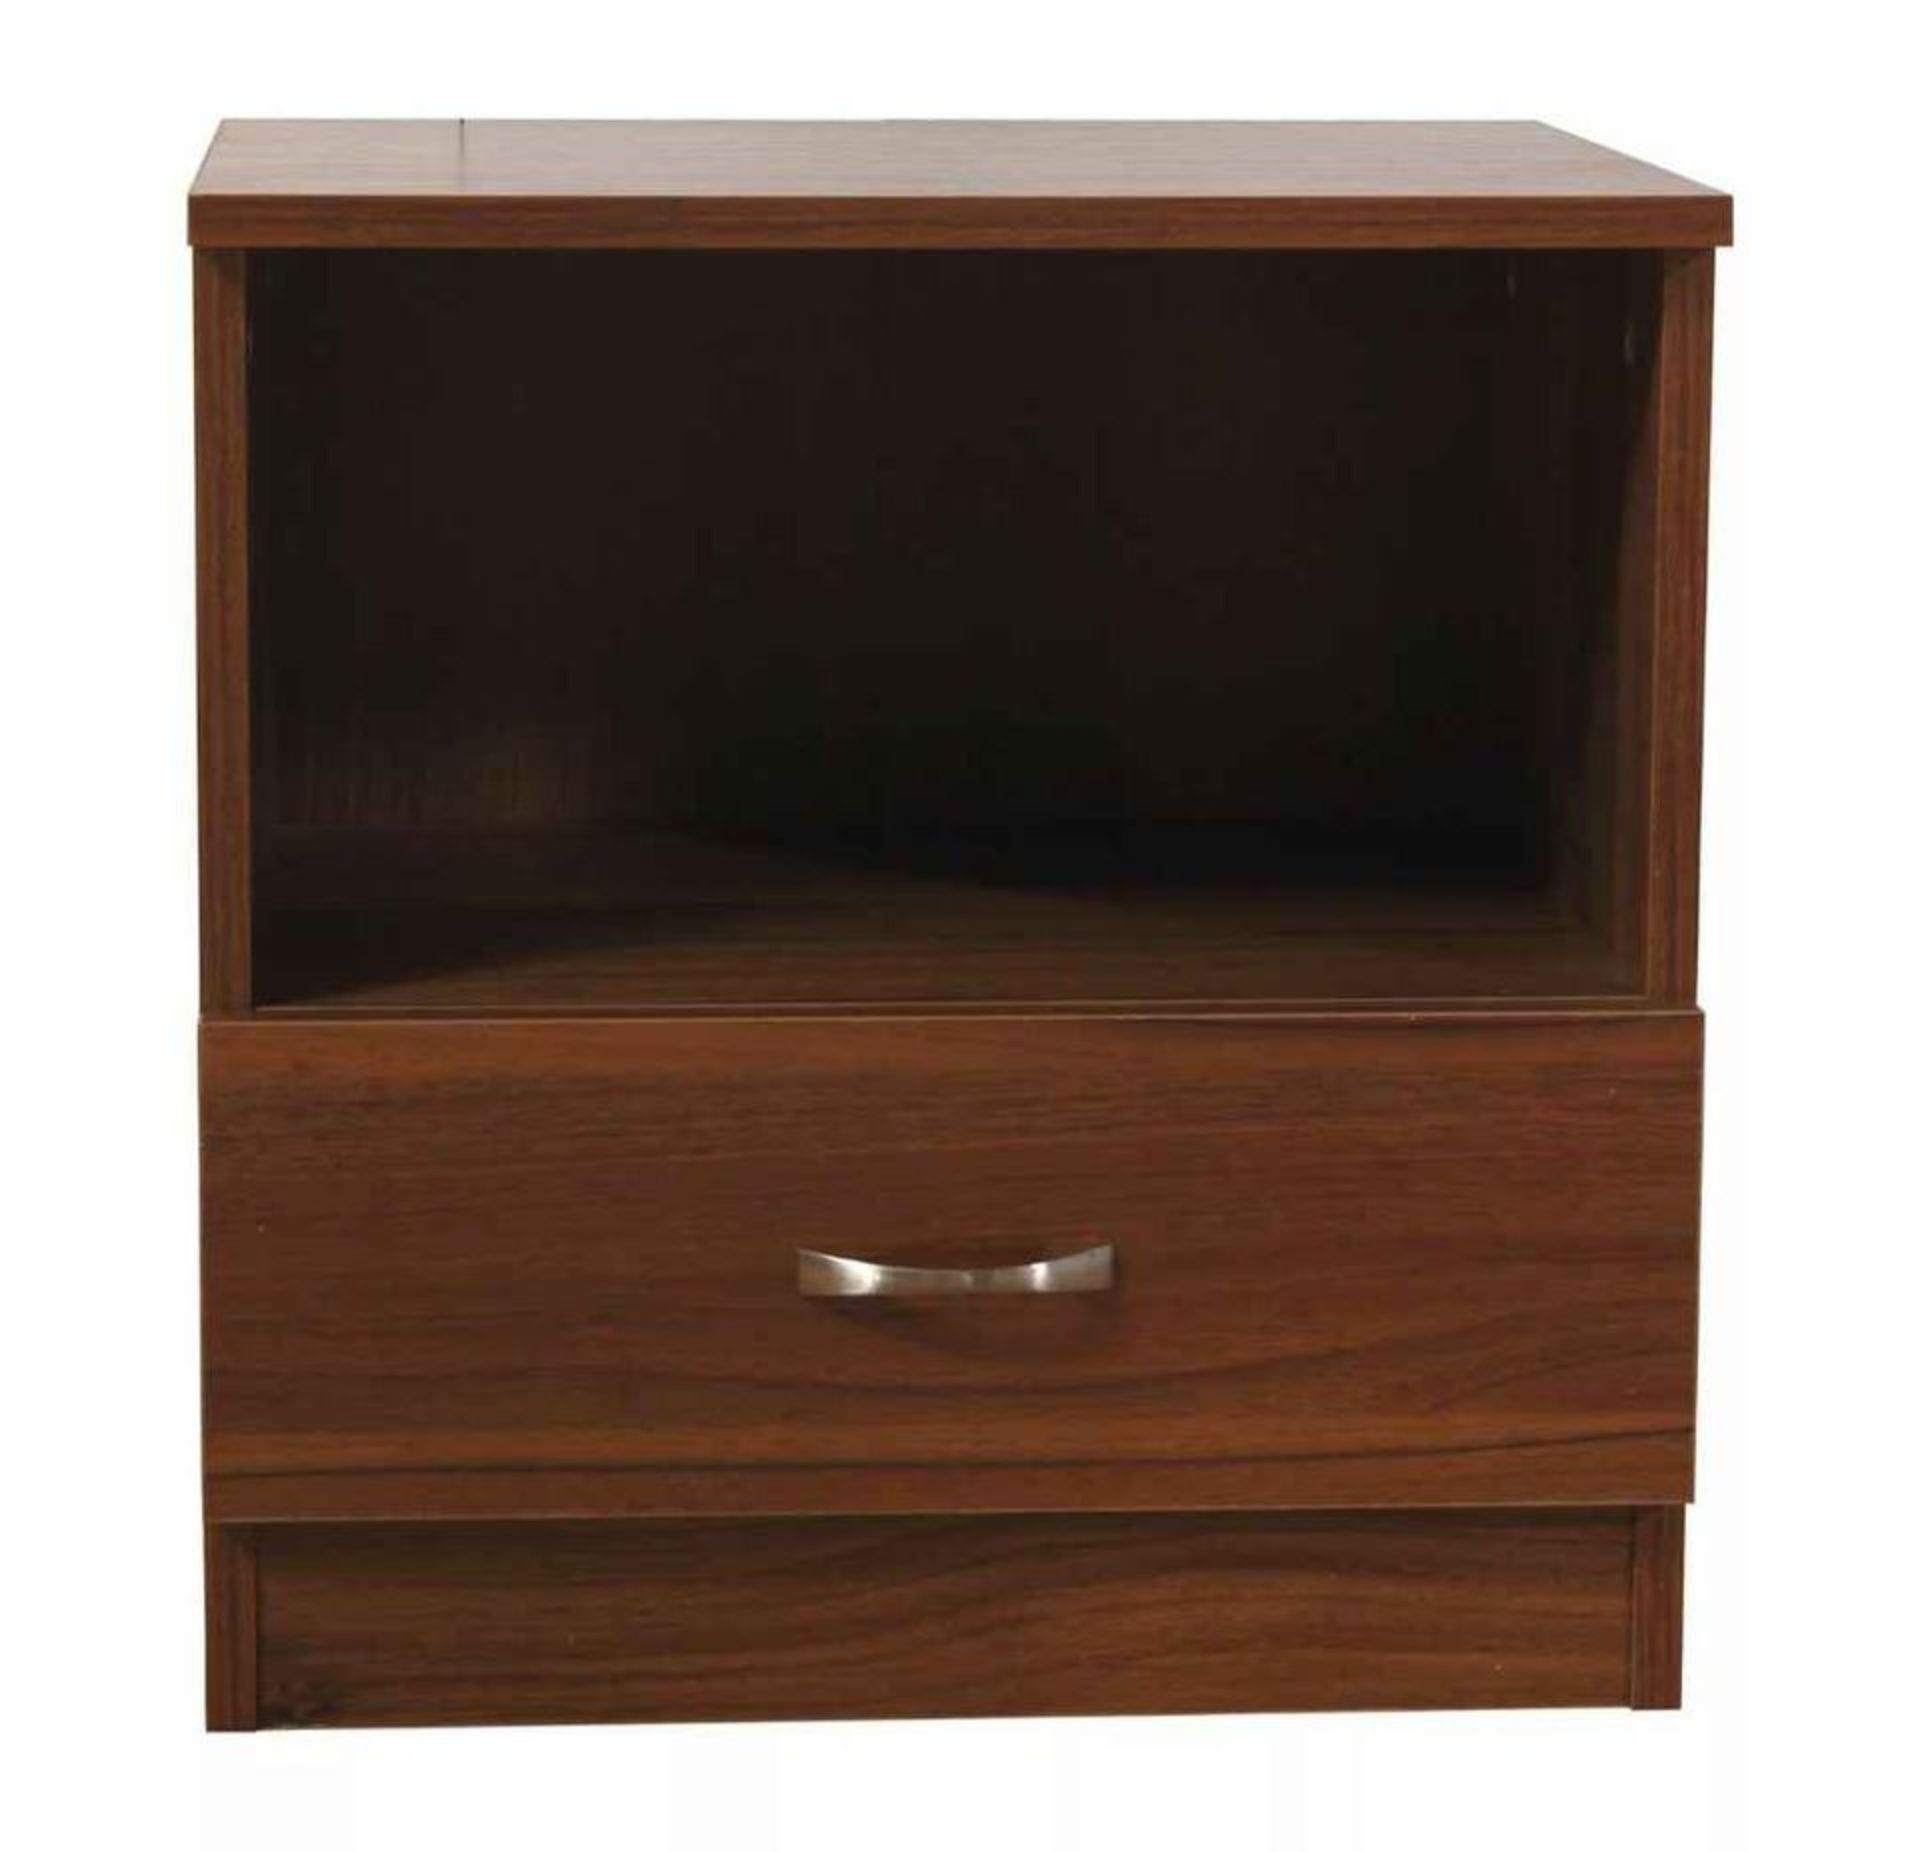 5 X FLATPACKED WALNUT BEDSIDE CABINETS BRAND NEW BOXED